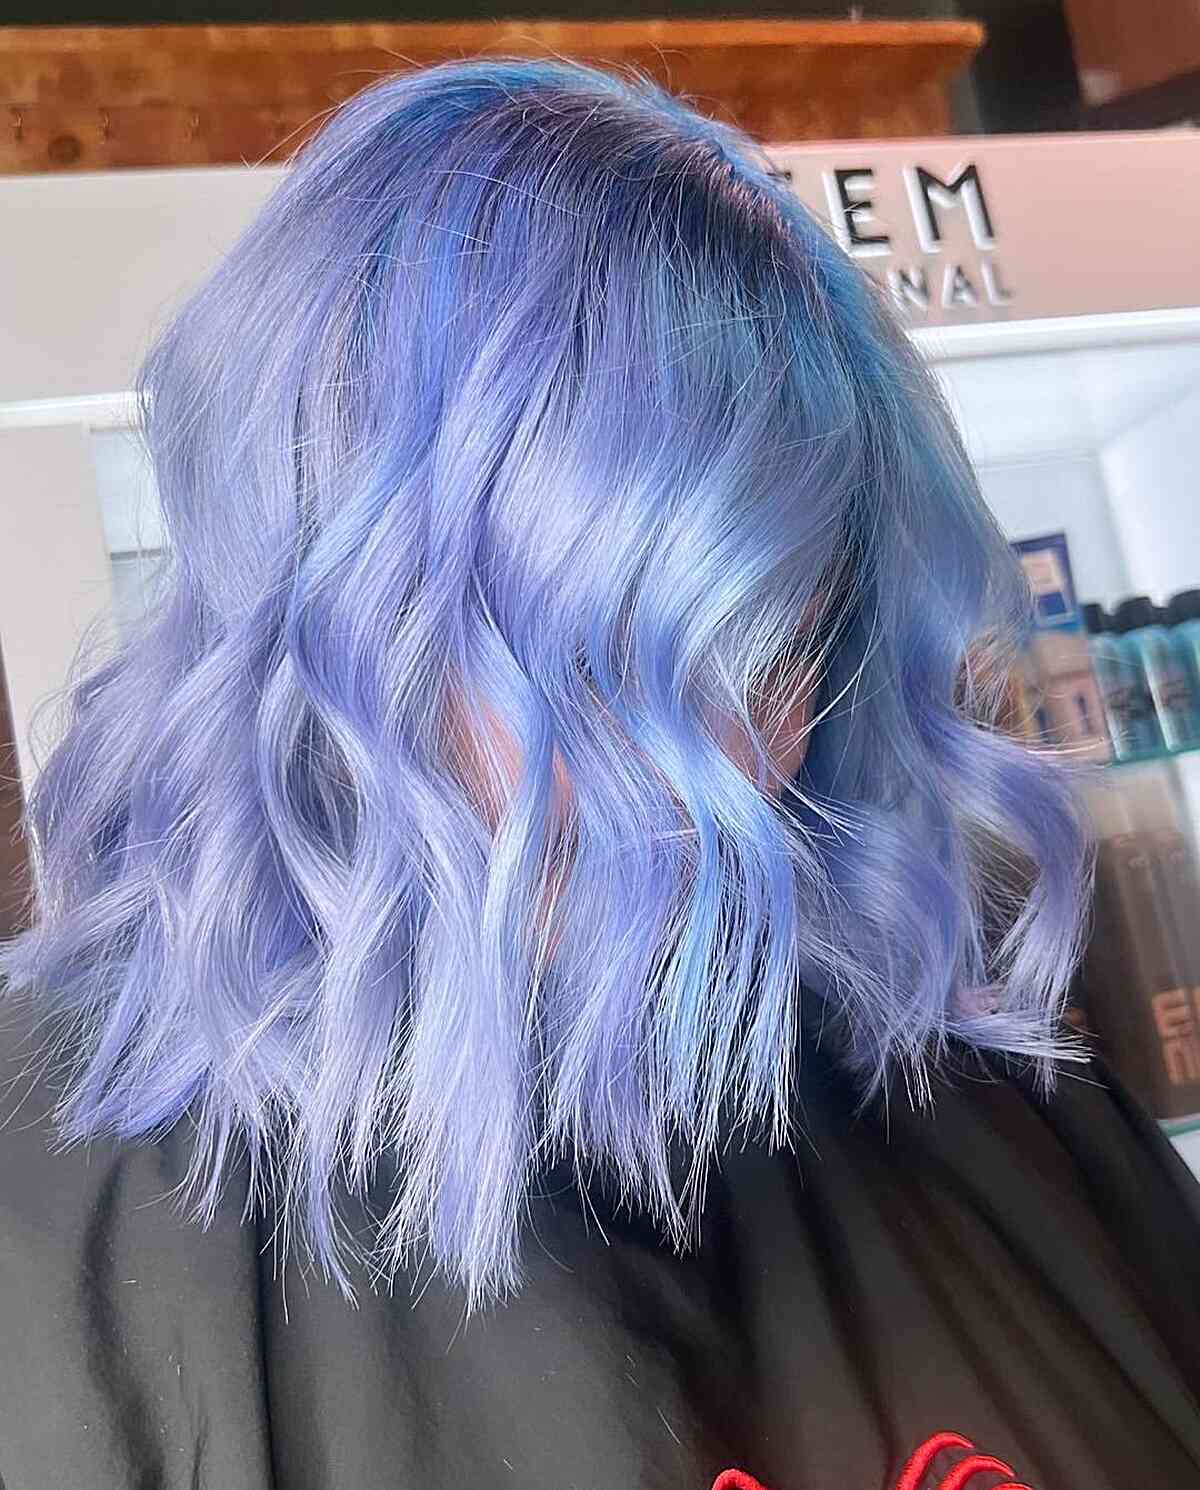 Cool Icy Blue Cotton Candy Color on Medium-Length Hair